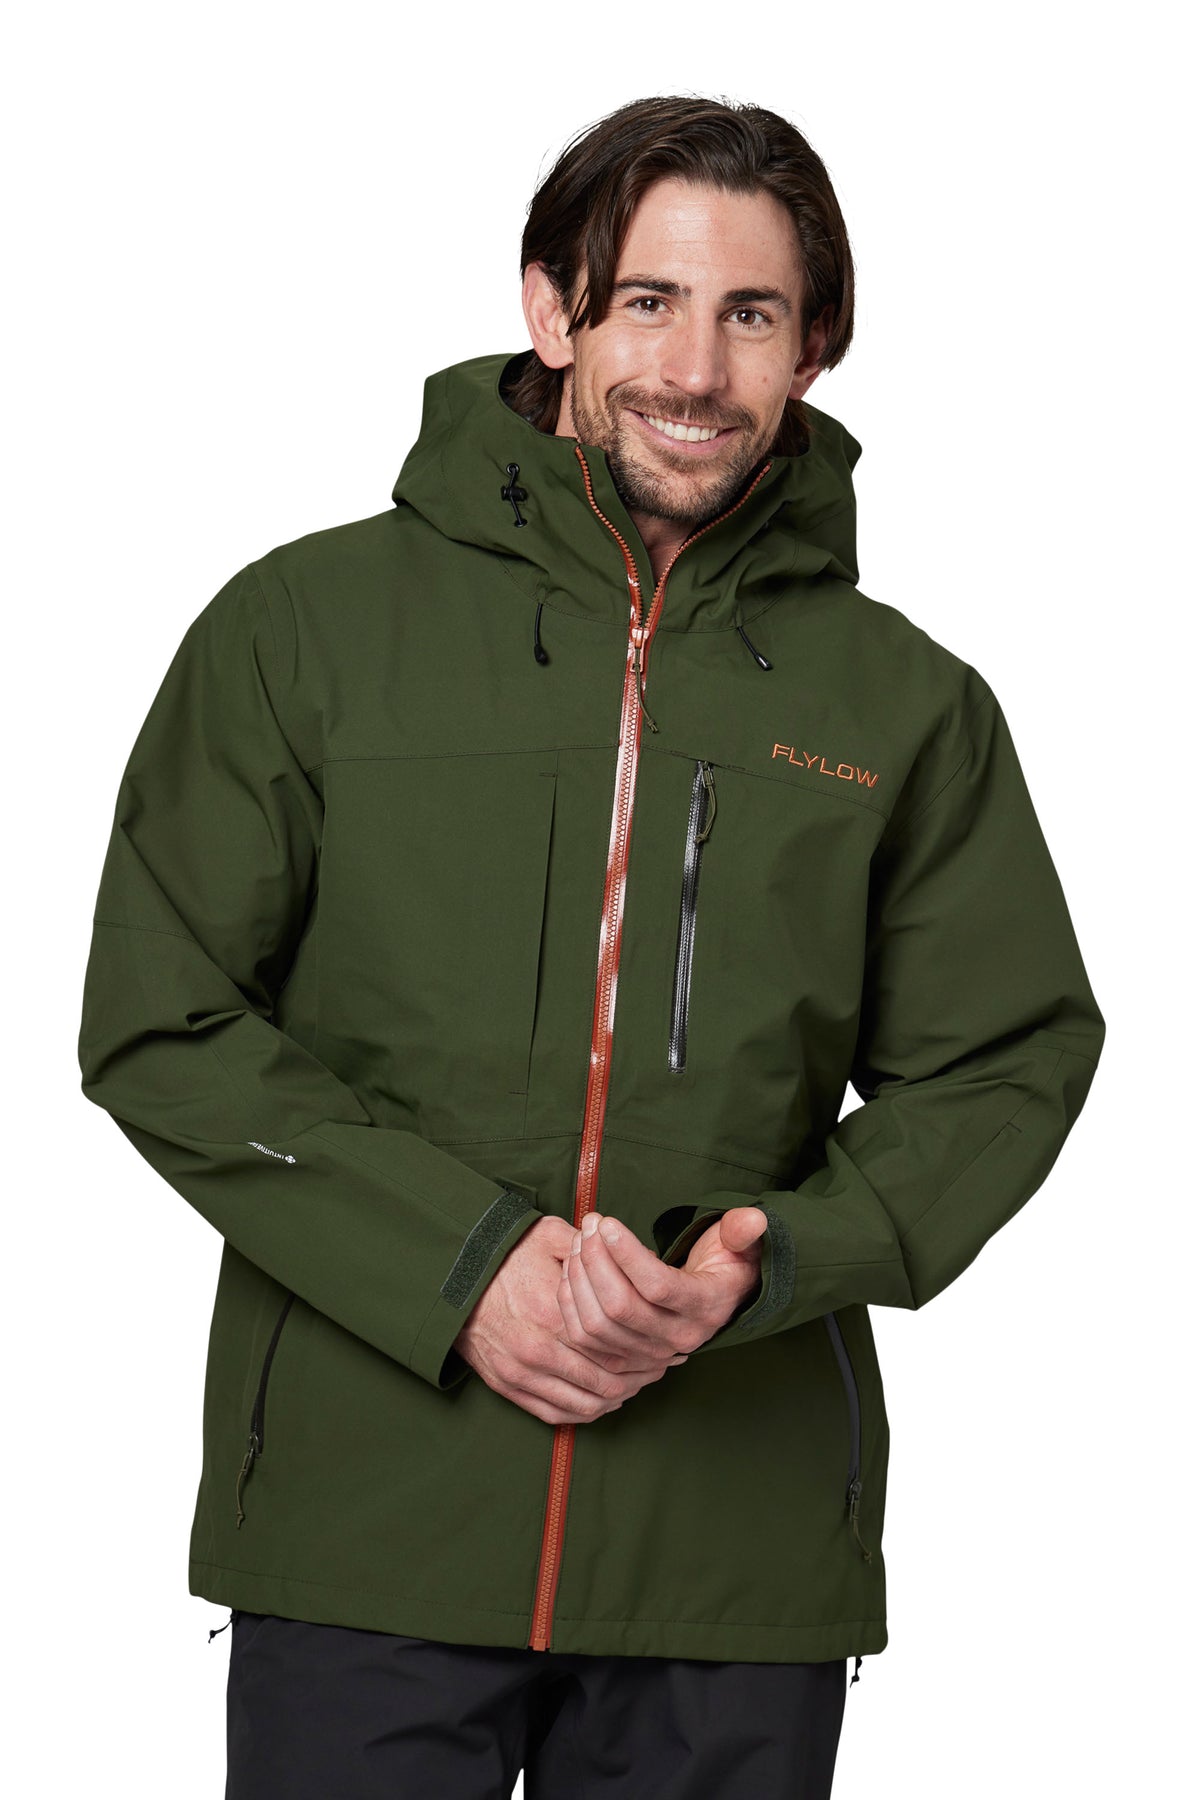 Men's Insulated Fishing Jacket with Removable Hood and Inner Storm